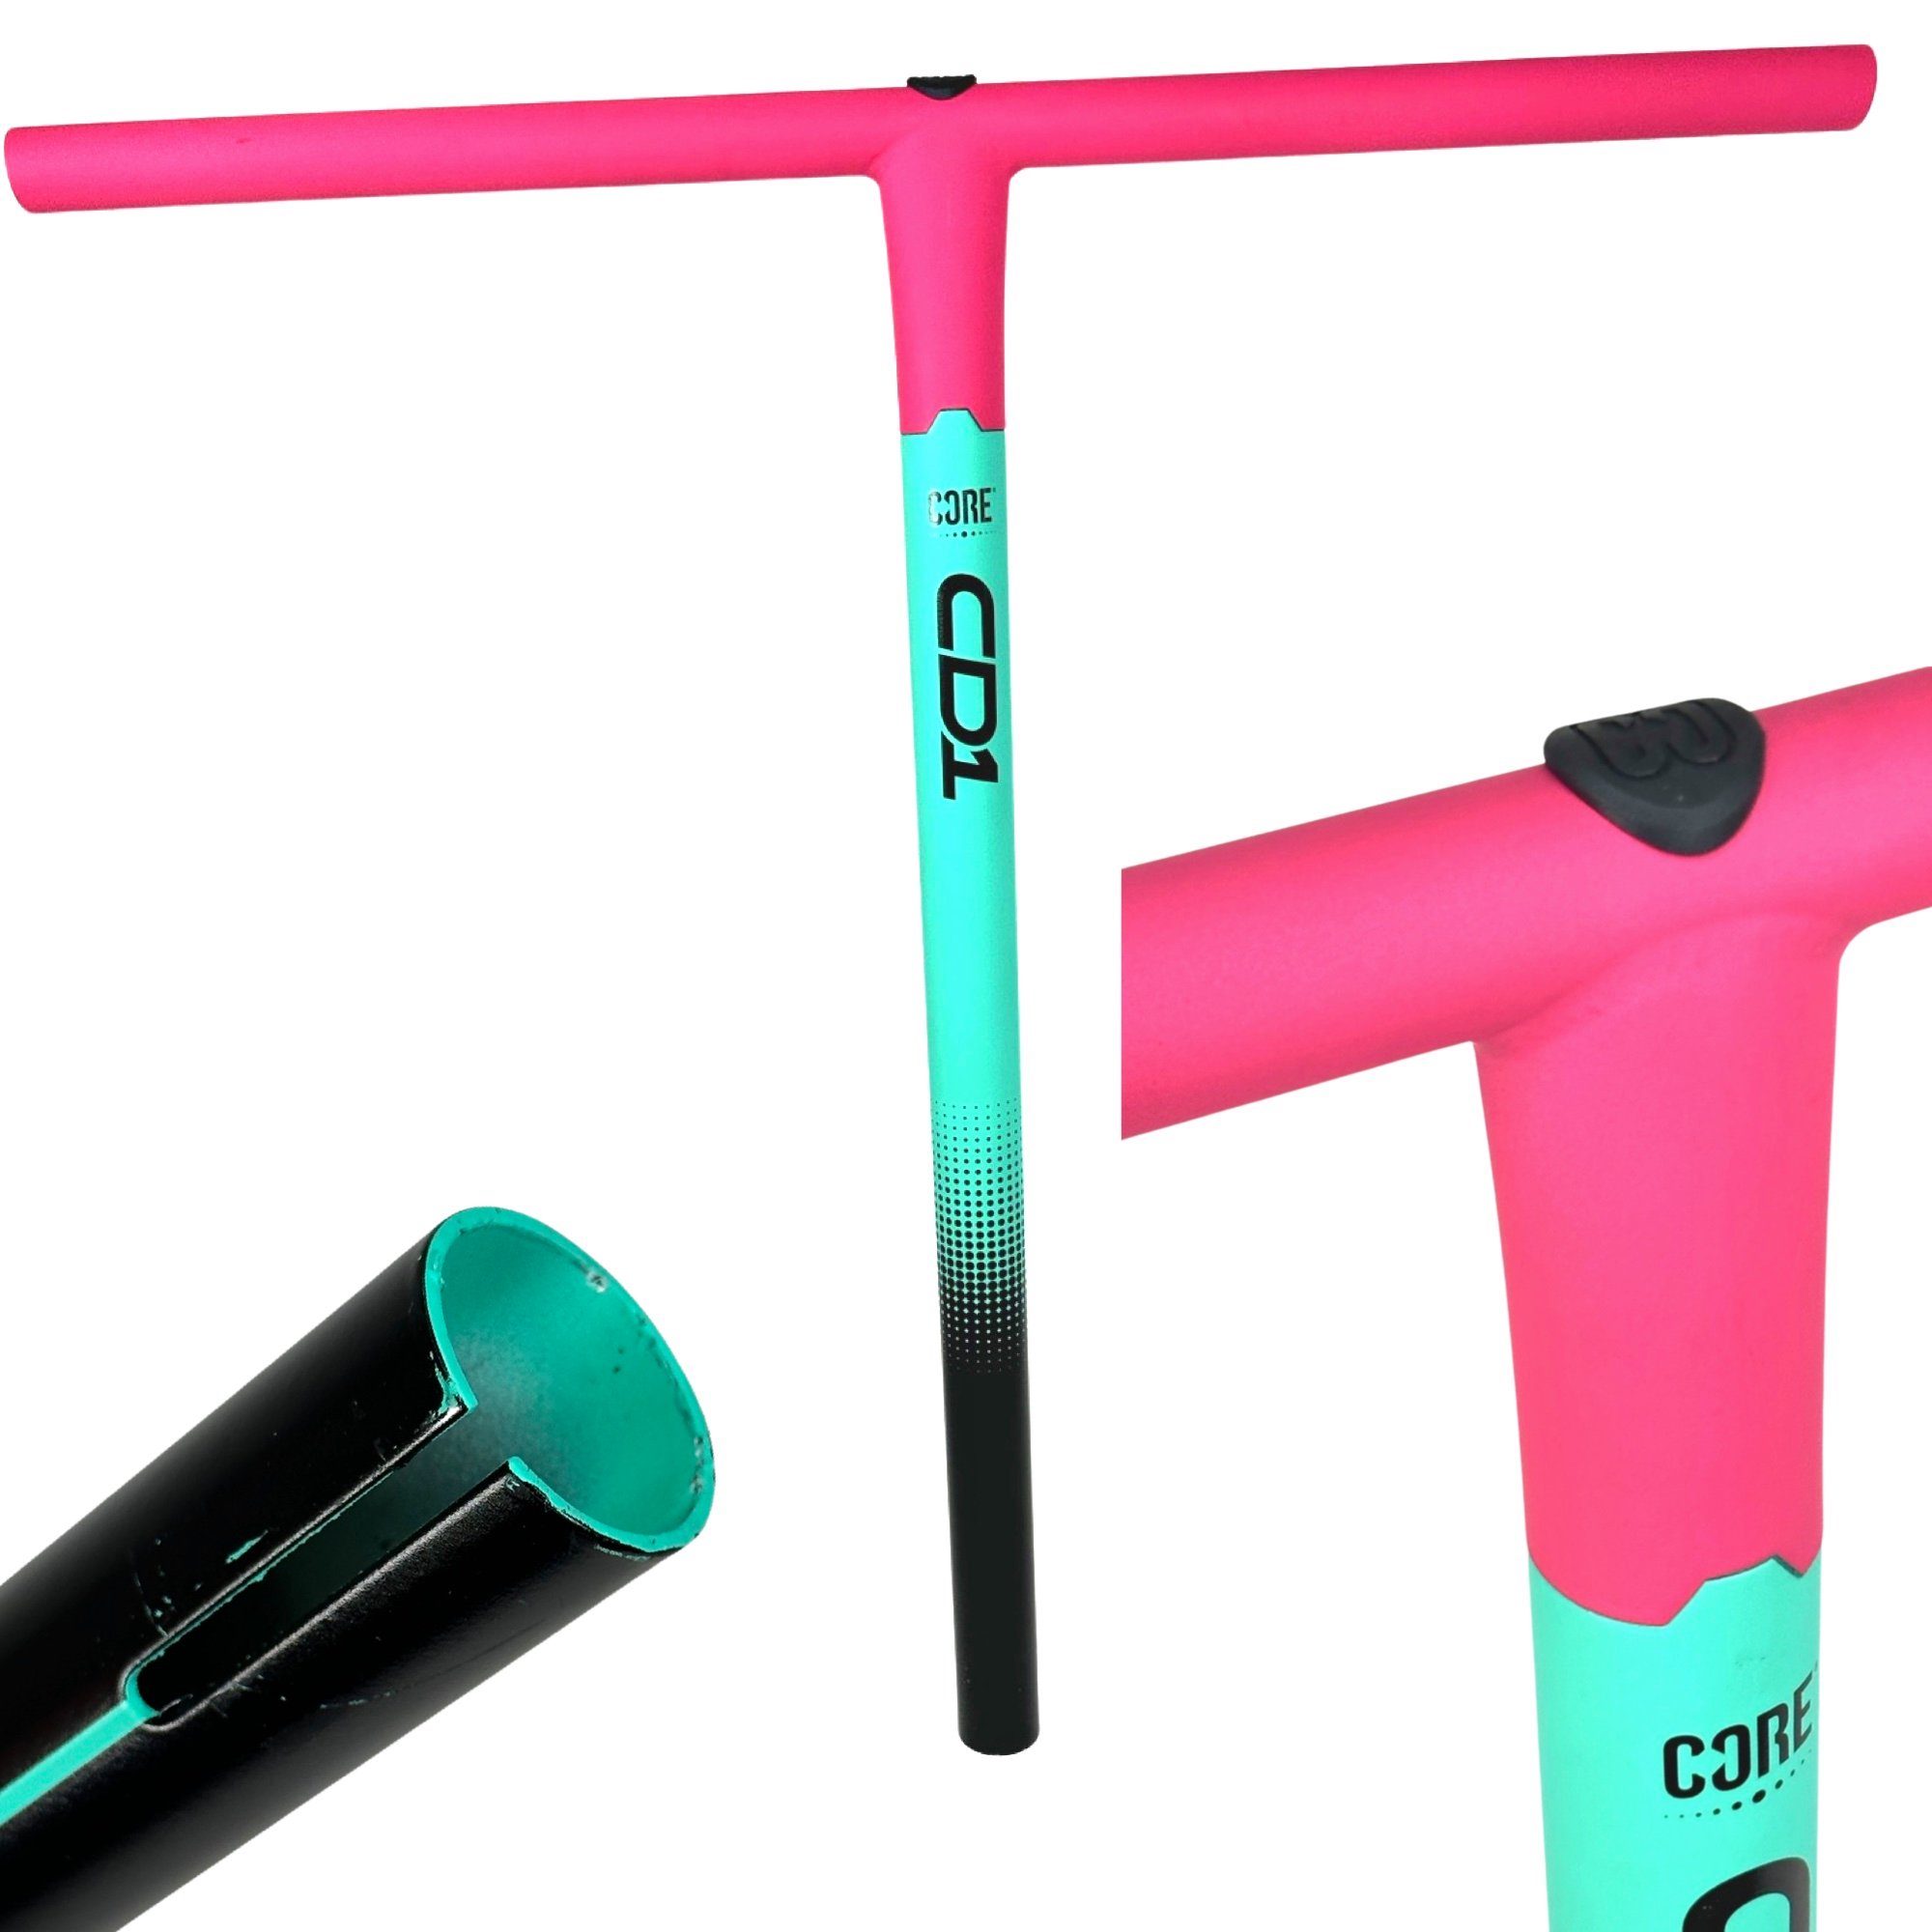 IHC Bar Stuntscooter Sports 32 Petrol/Pink 55,5cm CORE Stahl Stunt-Scooter CD1 Core Action